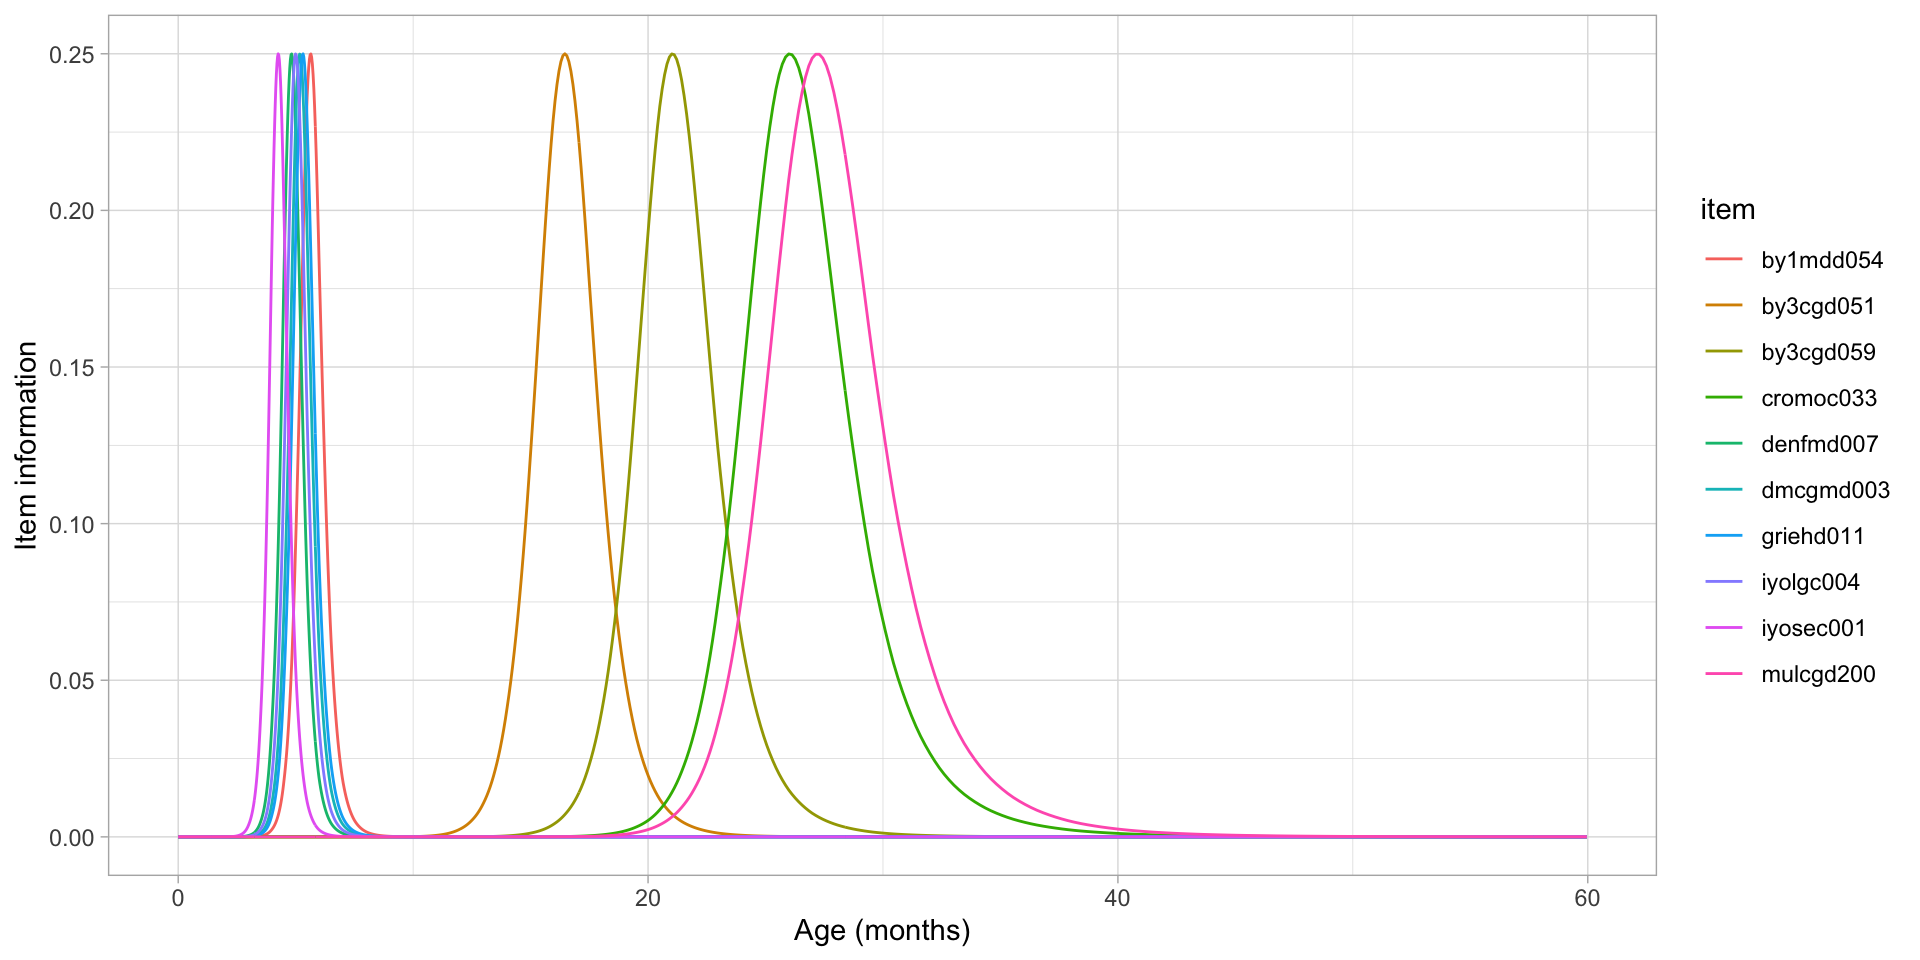 Item information by age for a set of 10 items not evenly distributed over the \(D\)-score scale.